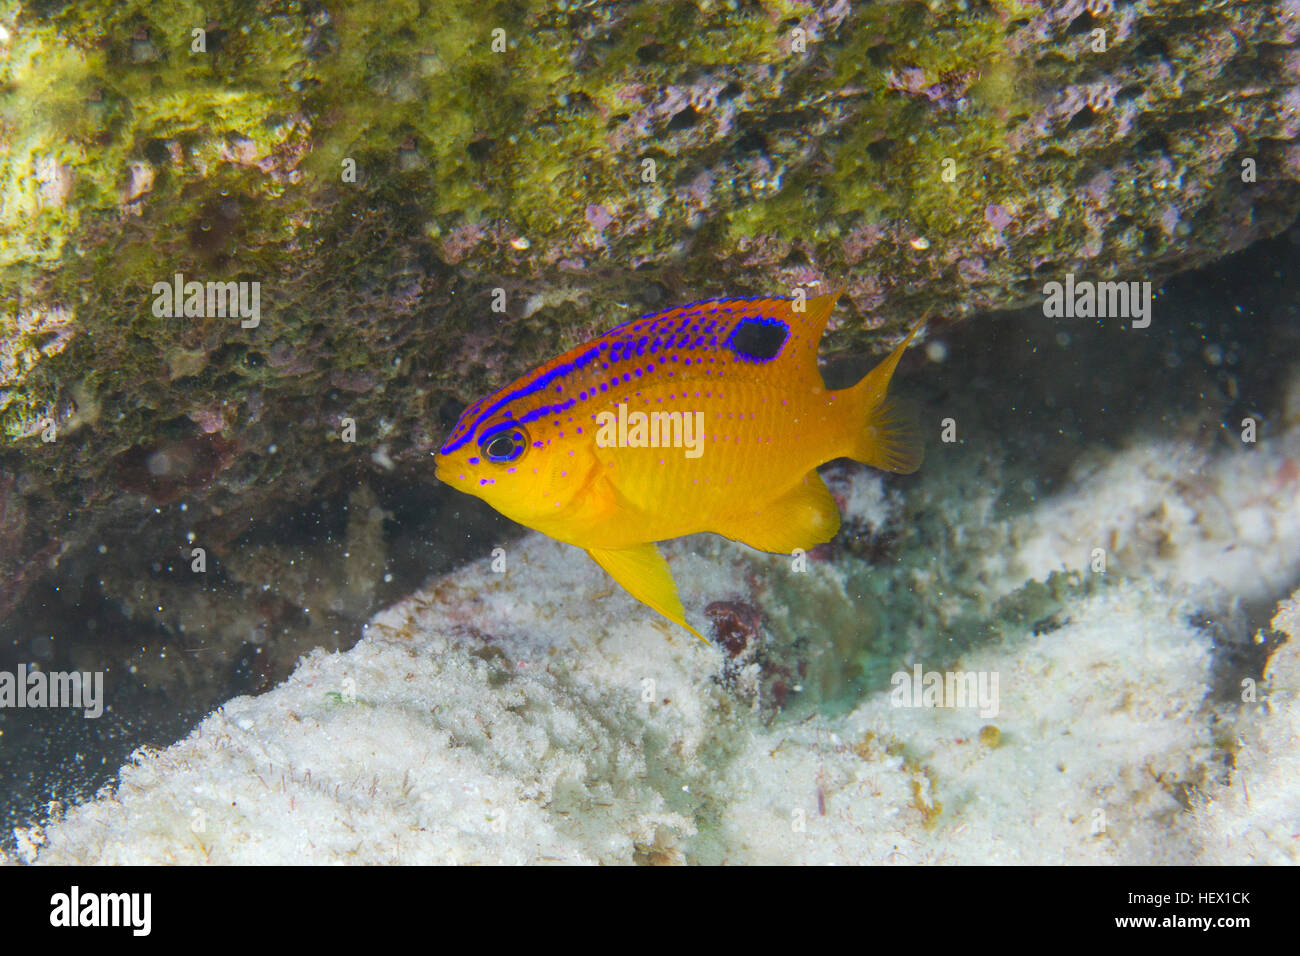 The Beau gregory, Stegastes leucostictus, swimming in a Caribbean reef. Stock Photo